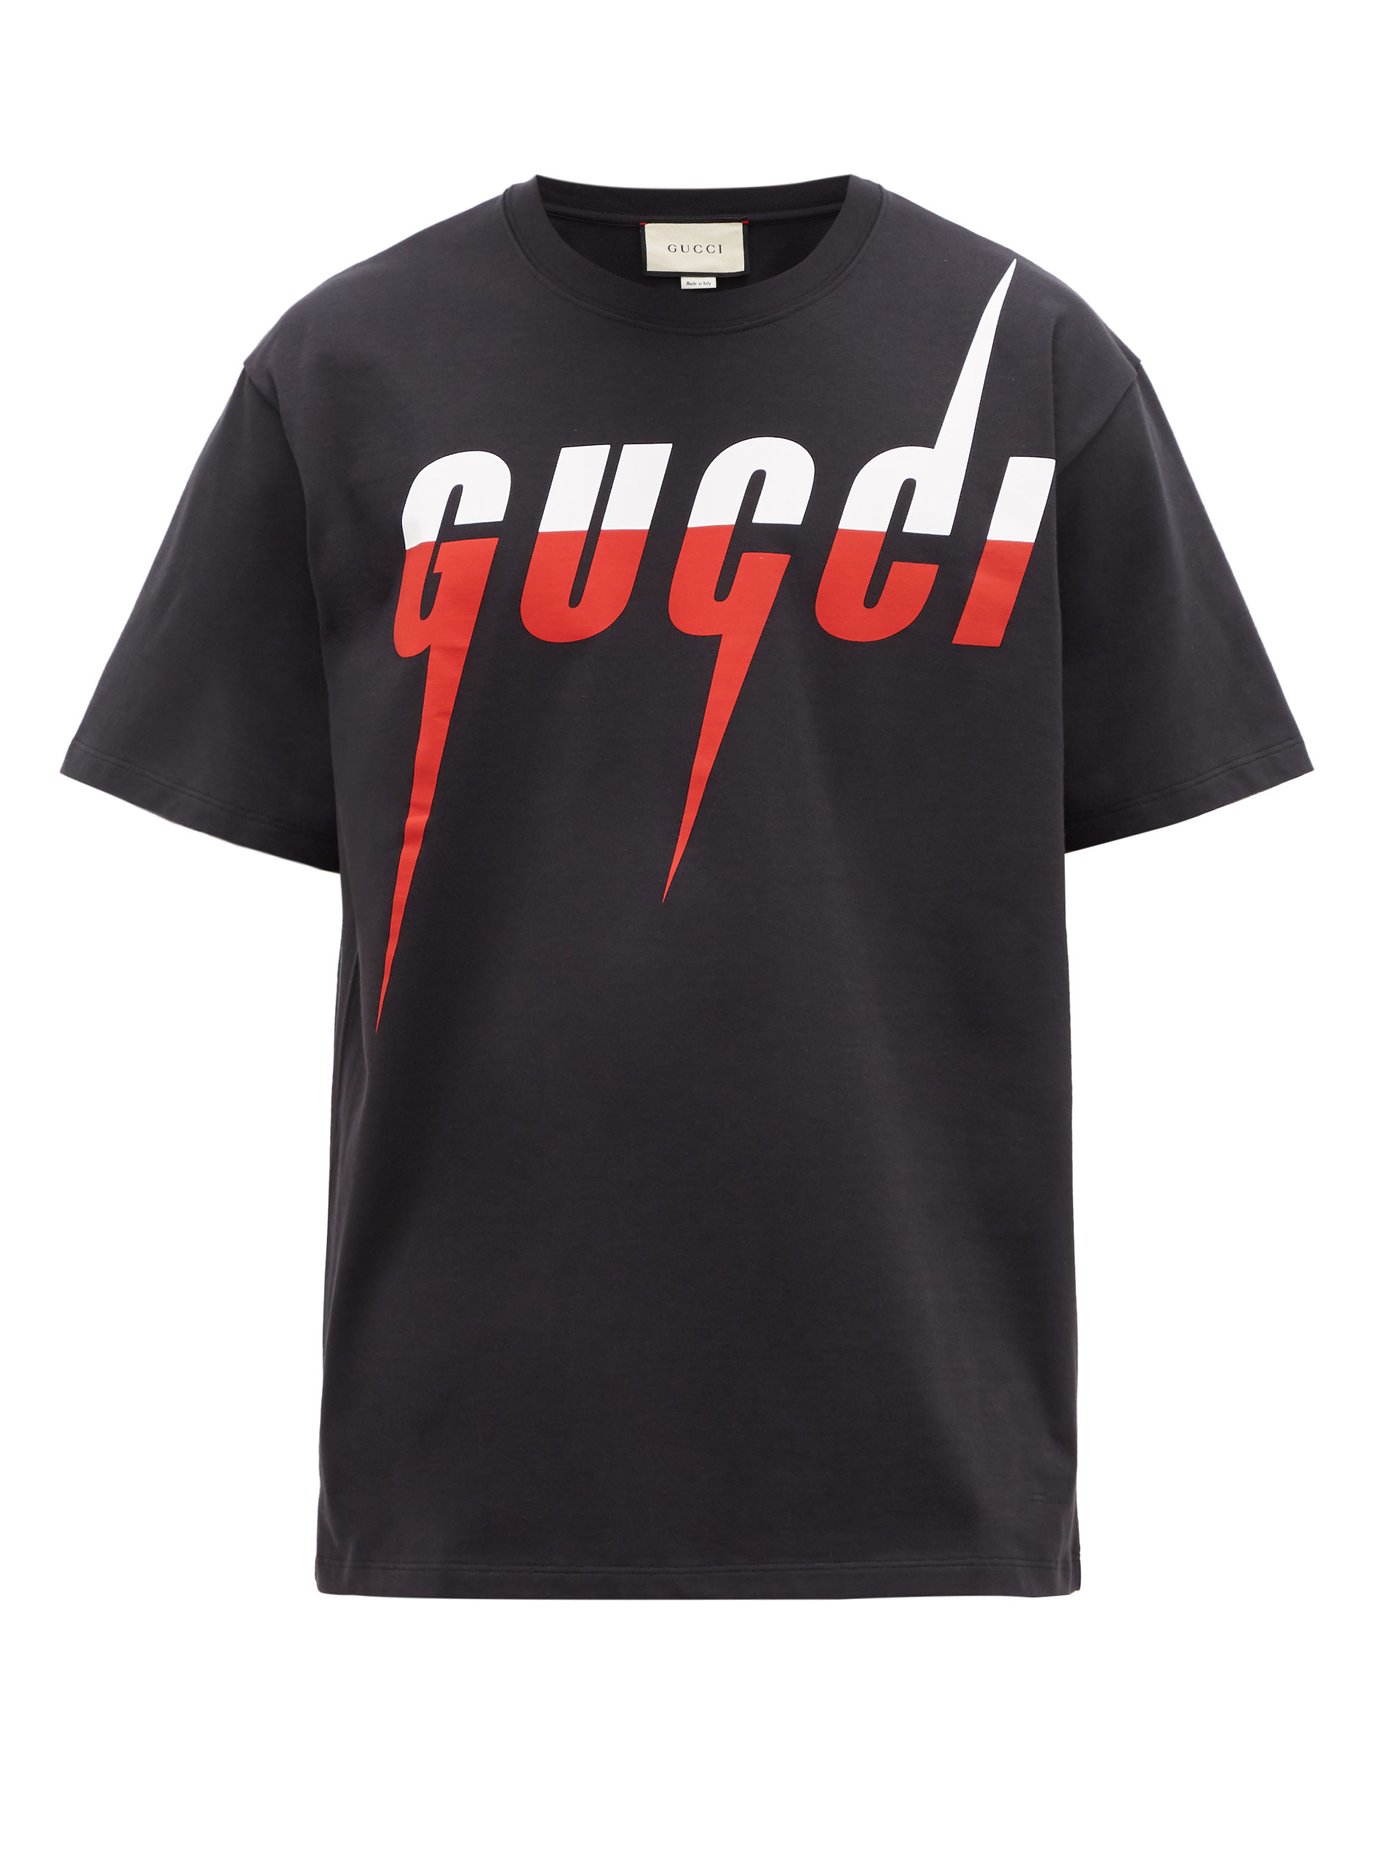 gucci t shirt first copy india